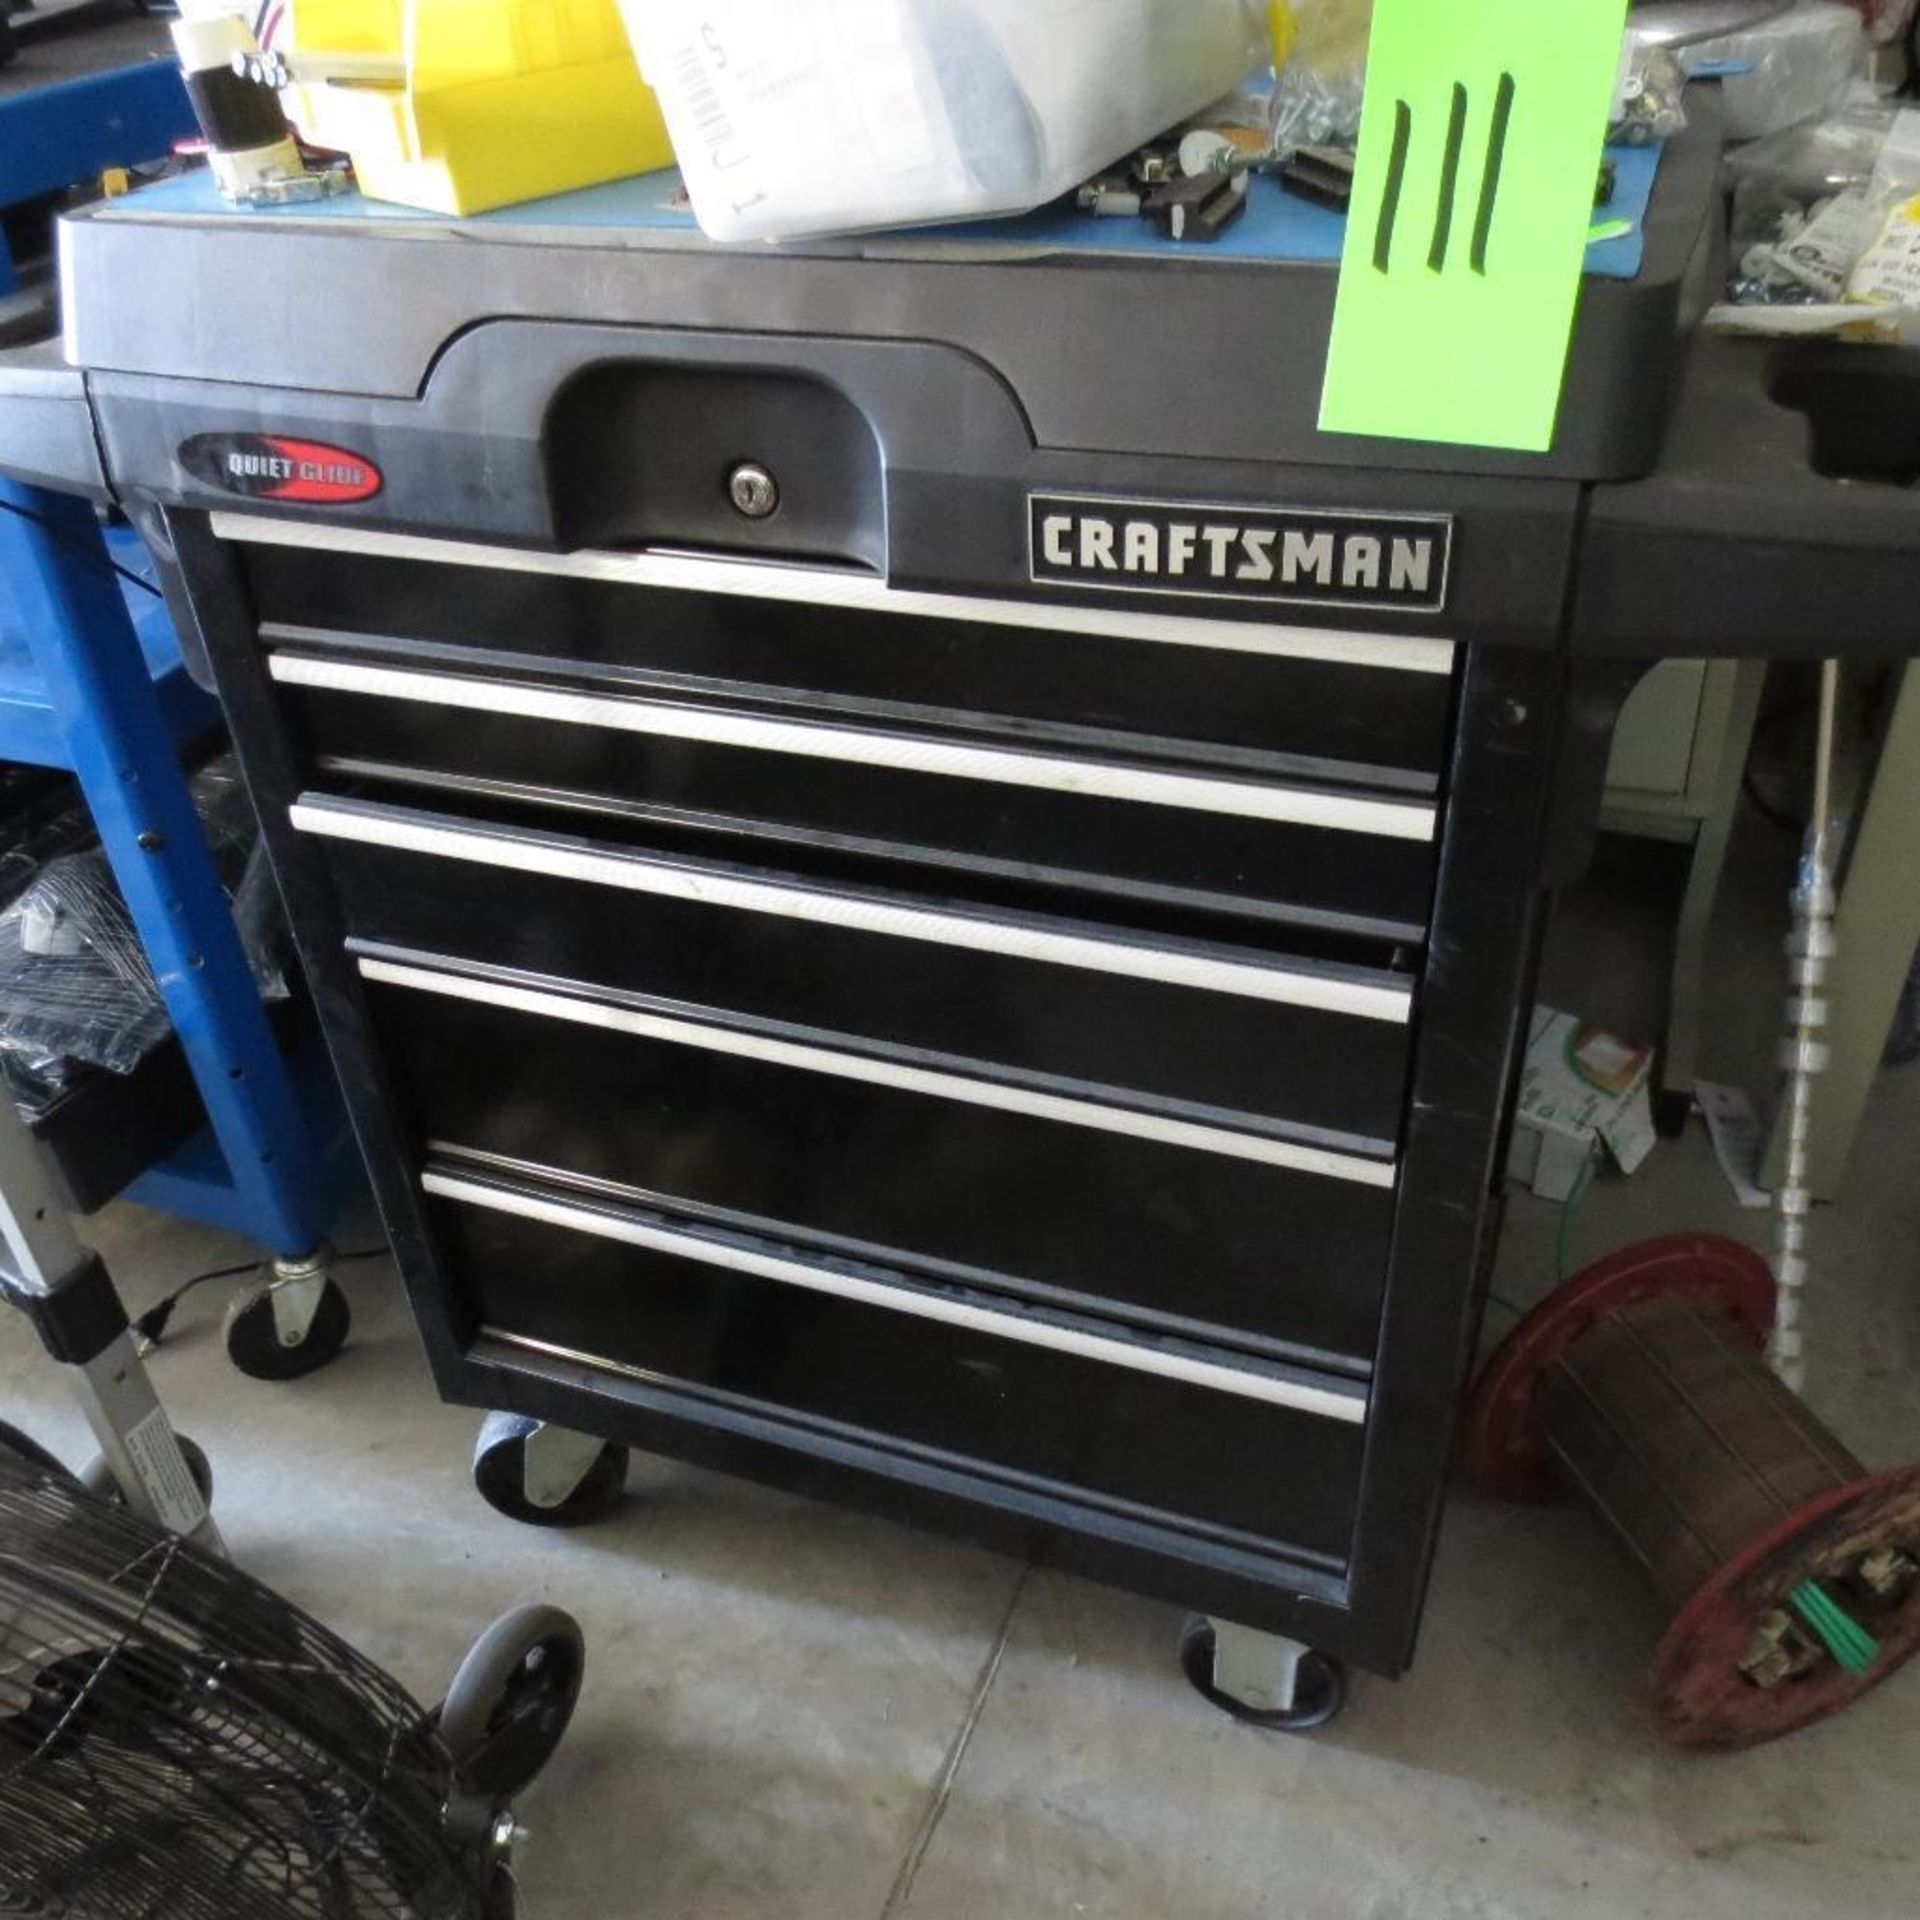 Craftsman Tool Box ( No Contents ); located at 556 Leffingwell Ave Kirkwood, MO 63122